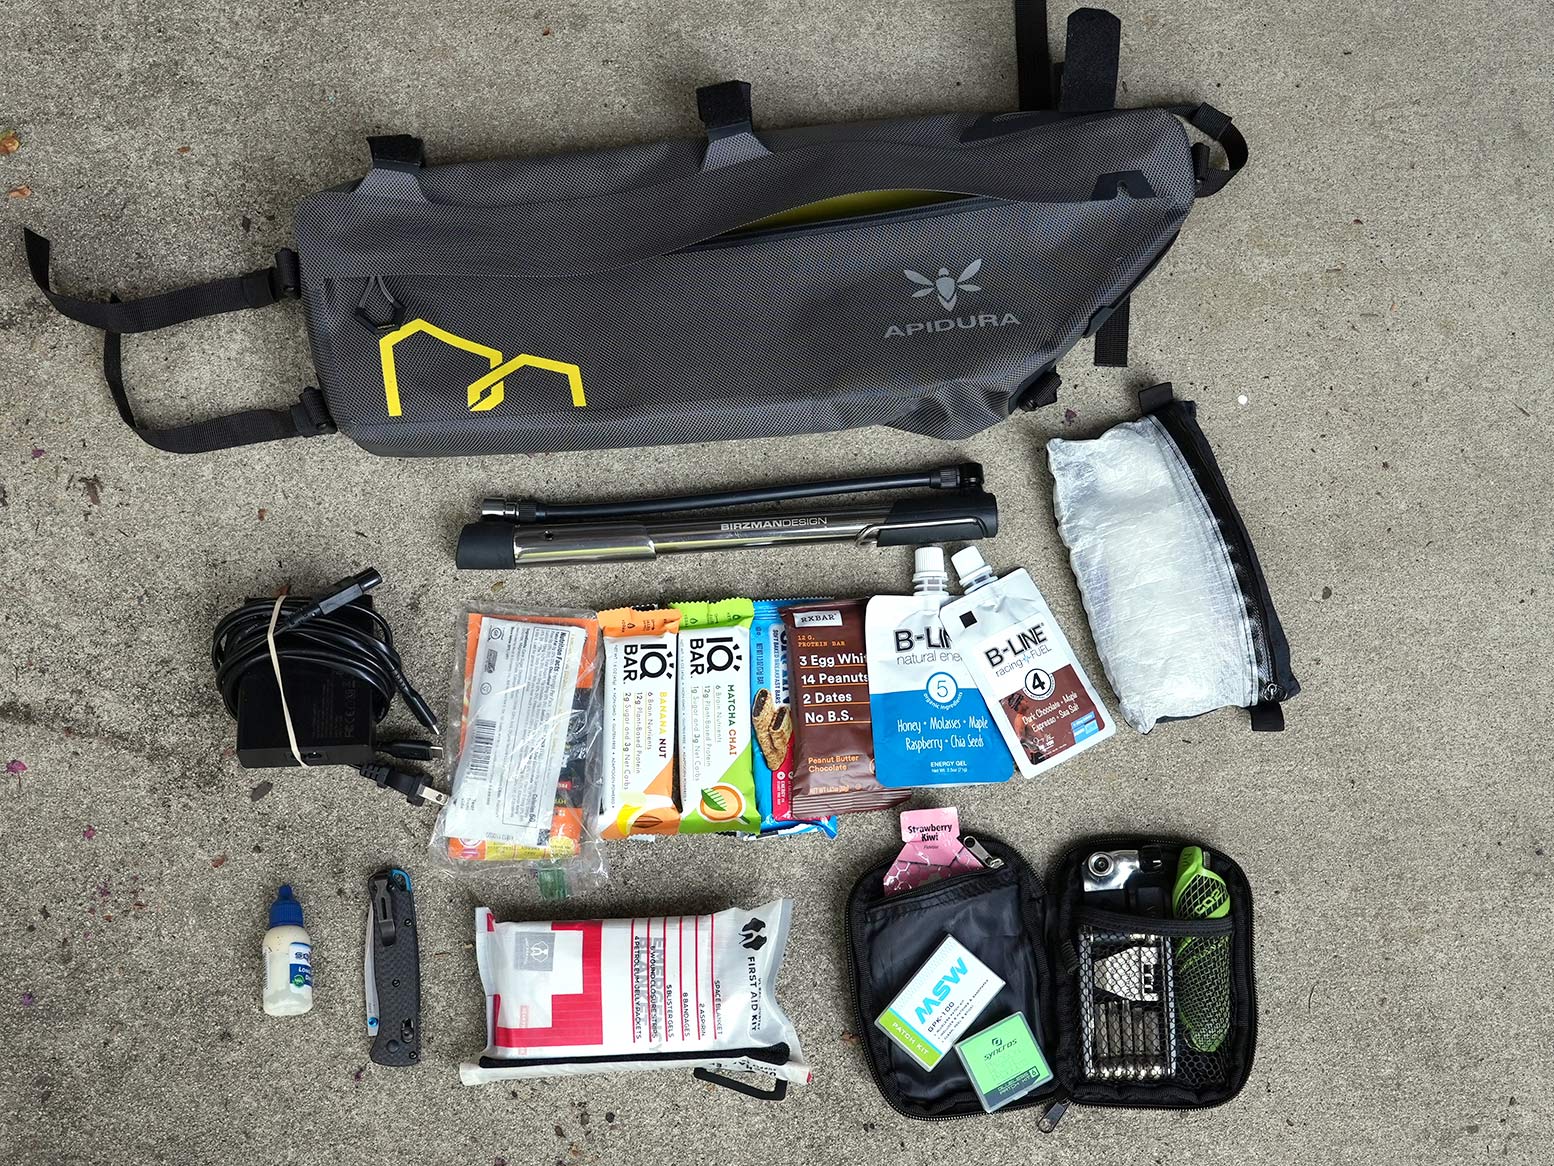 contents laid out showing what all will fit inside the apidura expedition frame pack